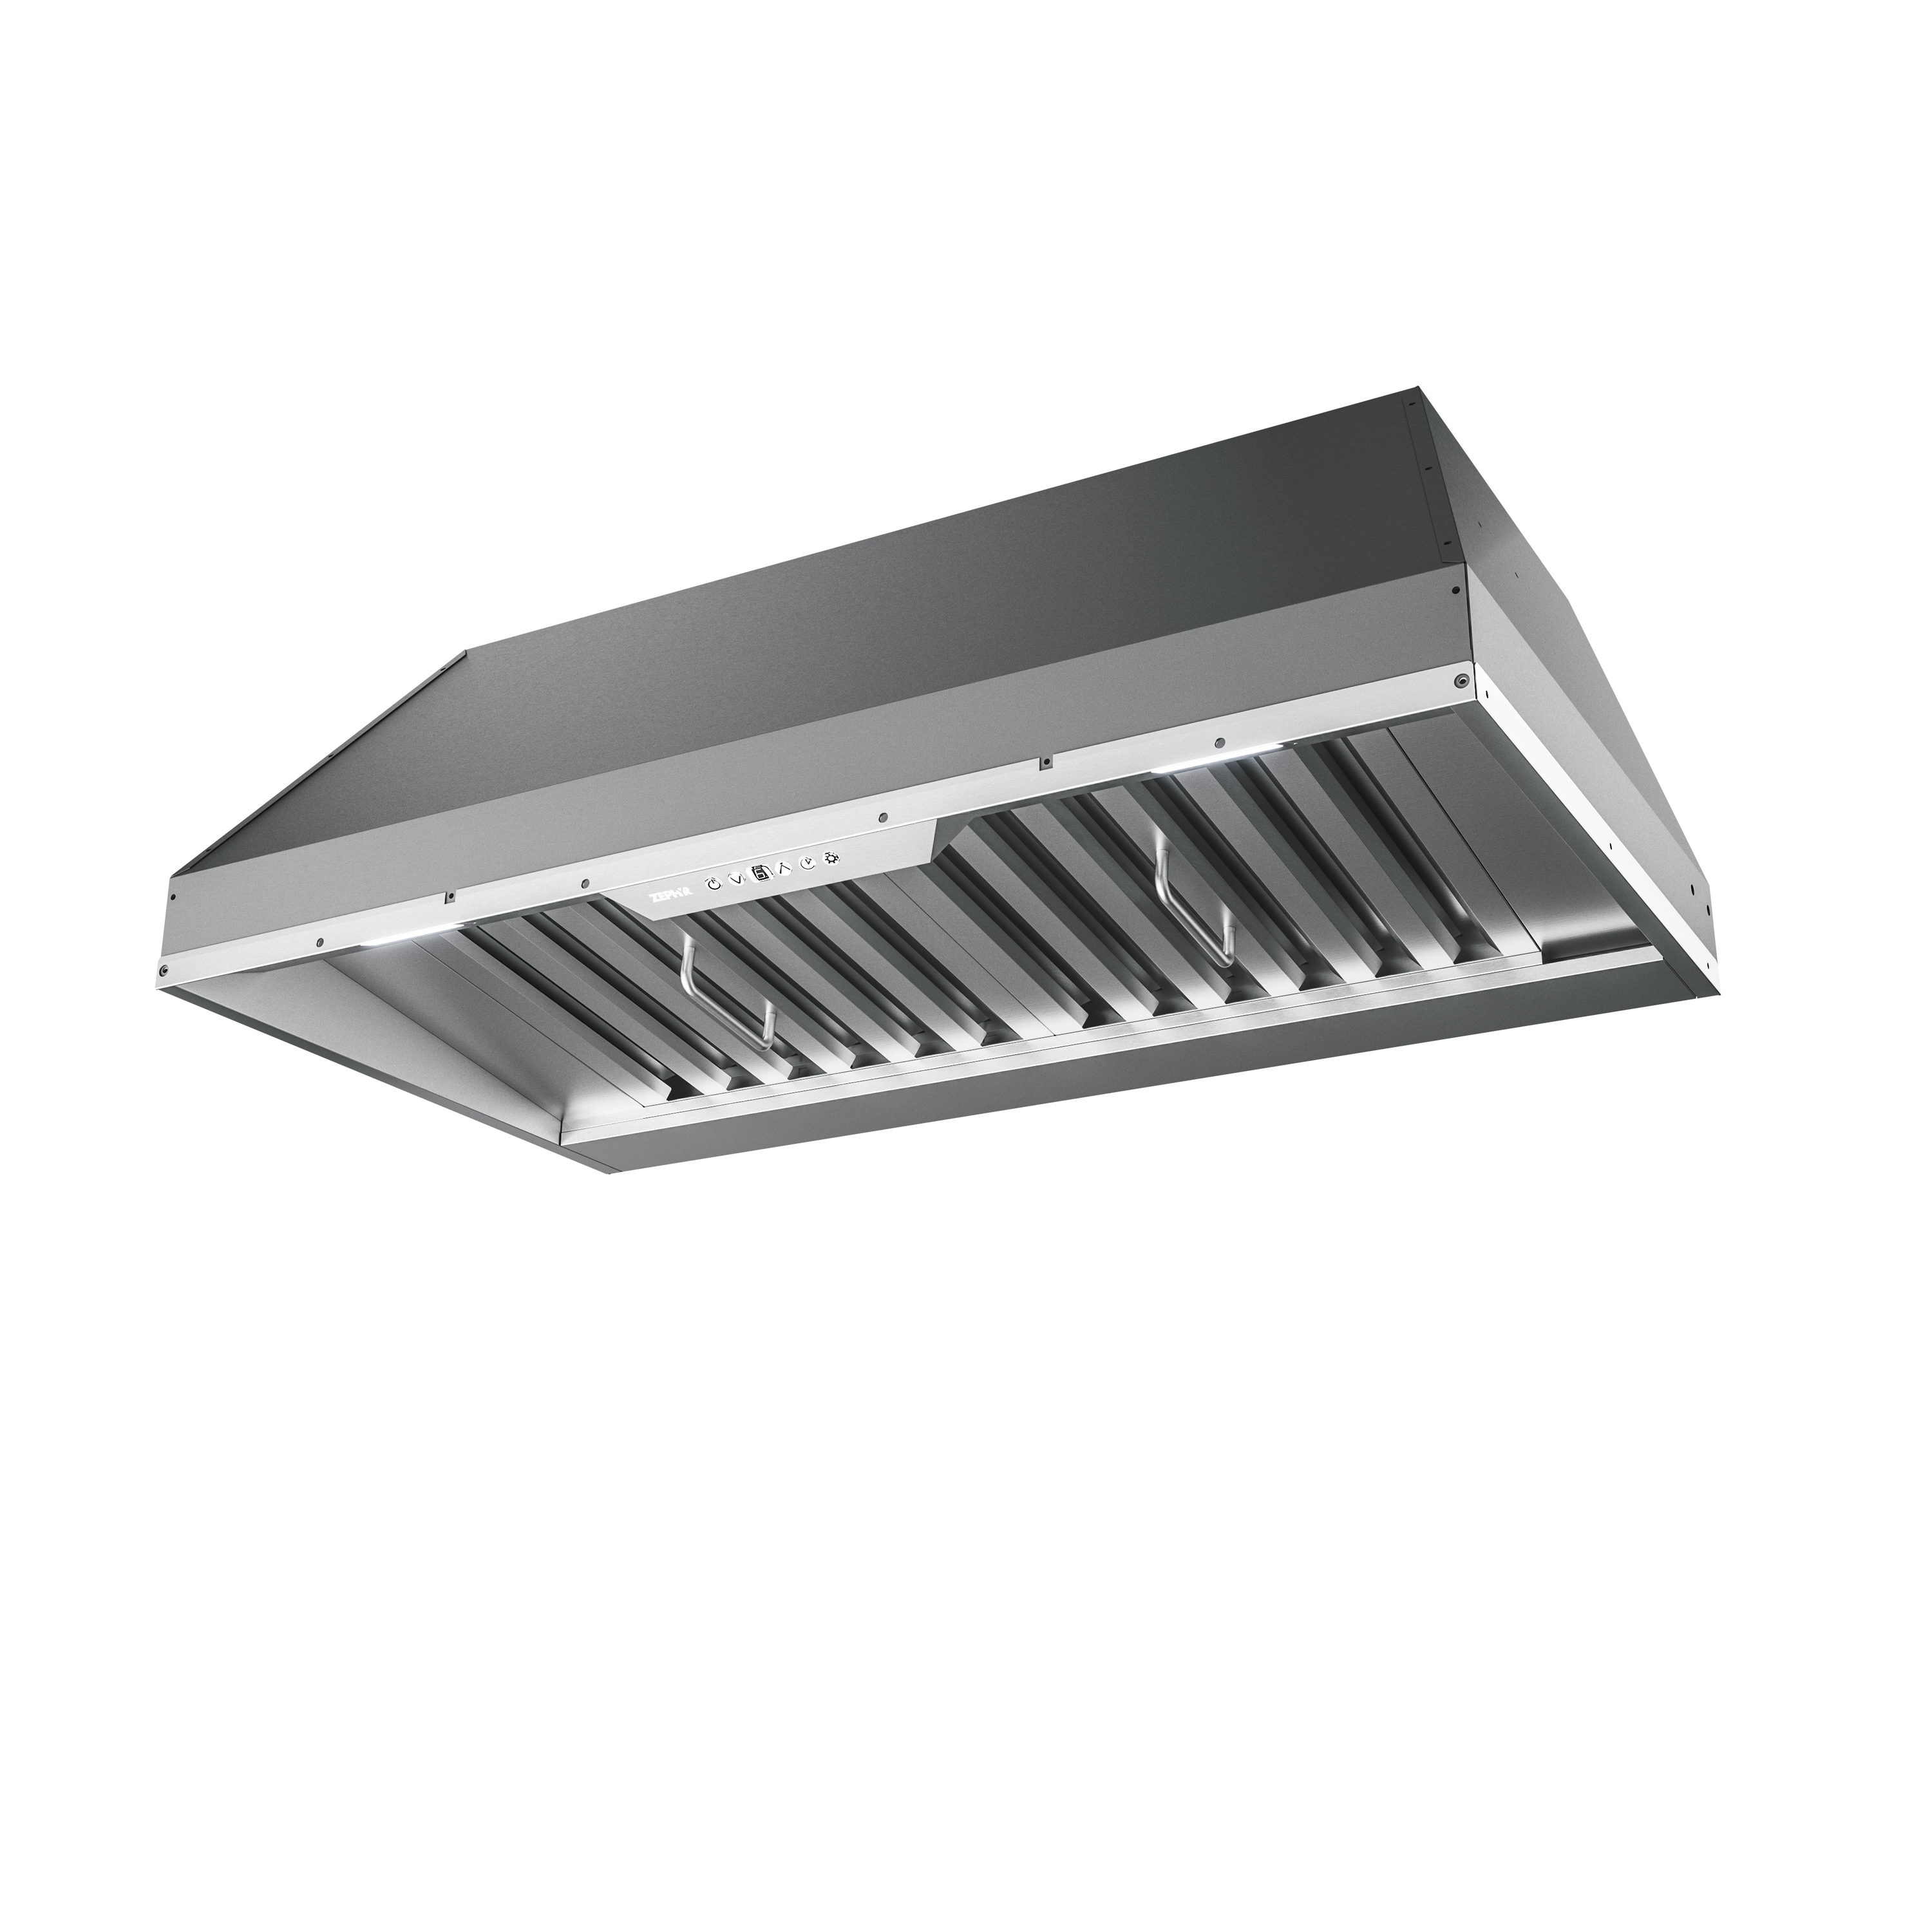 Zephyr Monsoon I 42-in Ducted Stainless Steel Undercabinet Range 